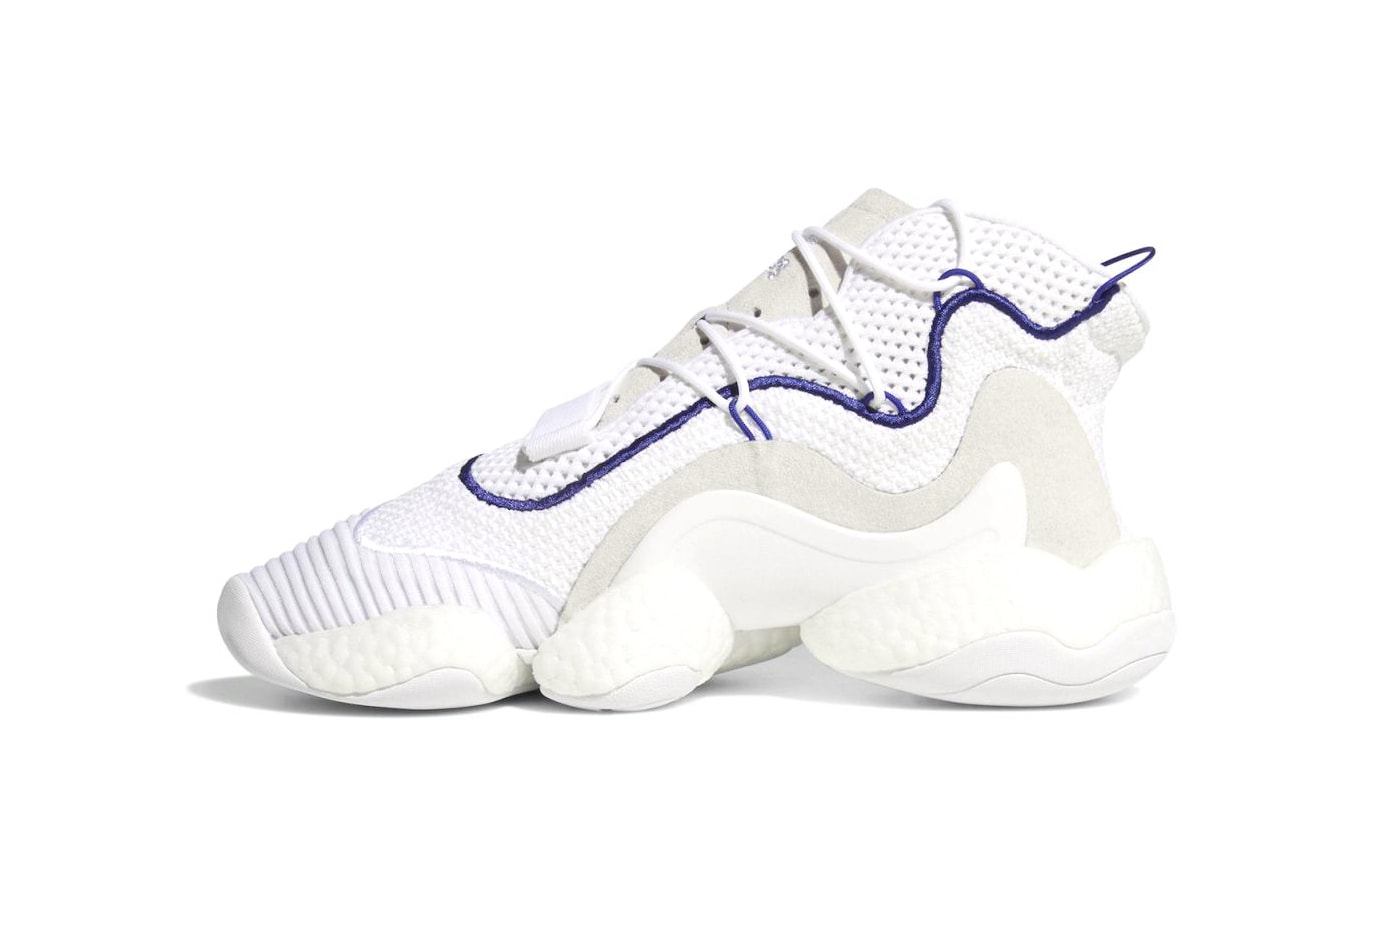 adidas Originals Crazy BYW LVL 1 white release date March 1 Sneakers Shoes Footwear